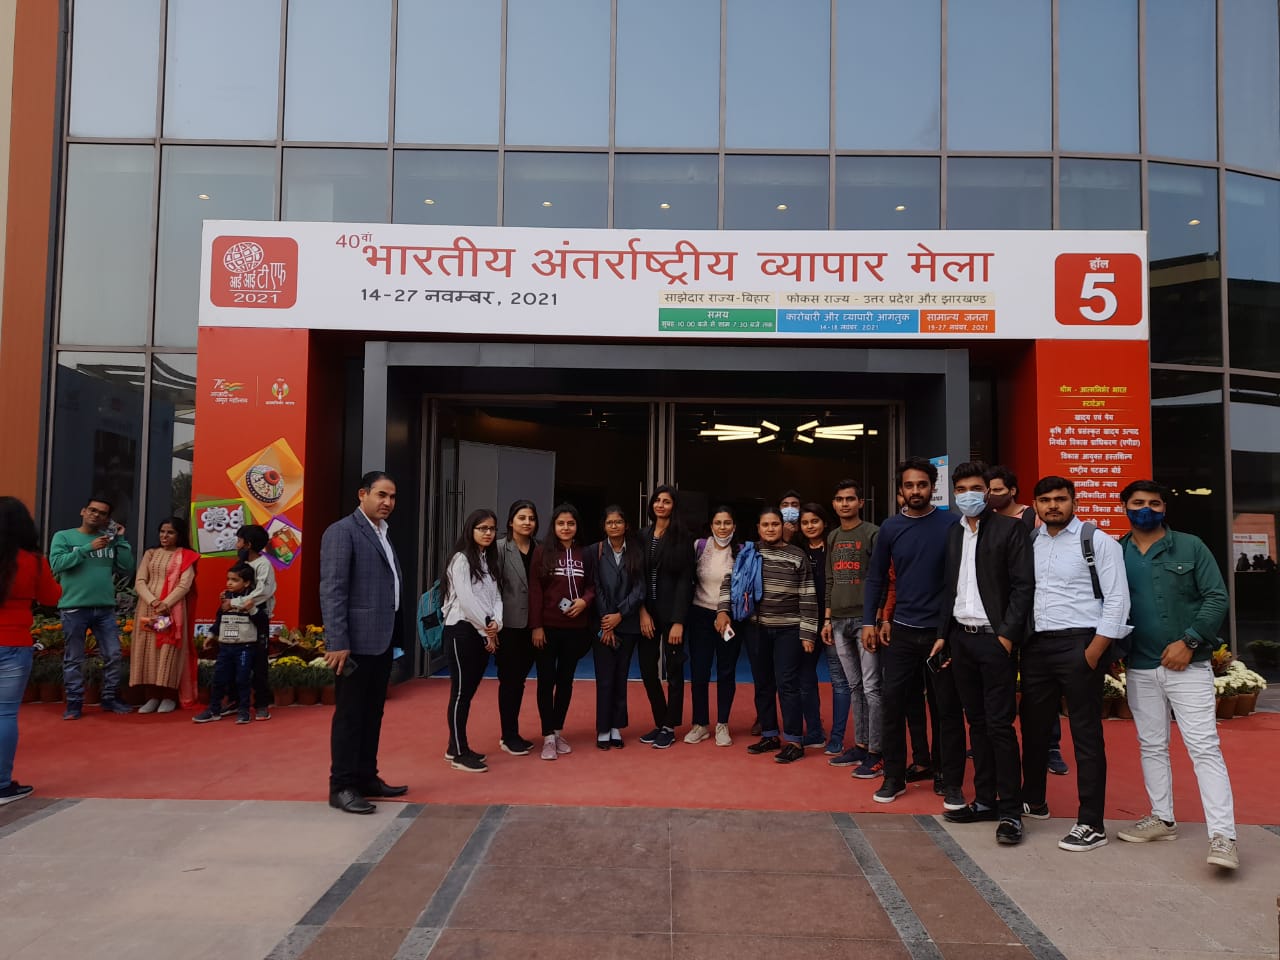 Top Pharmacy College in Greater Noida.